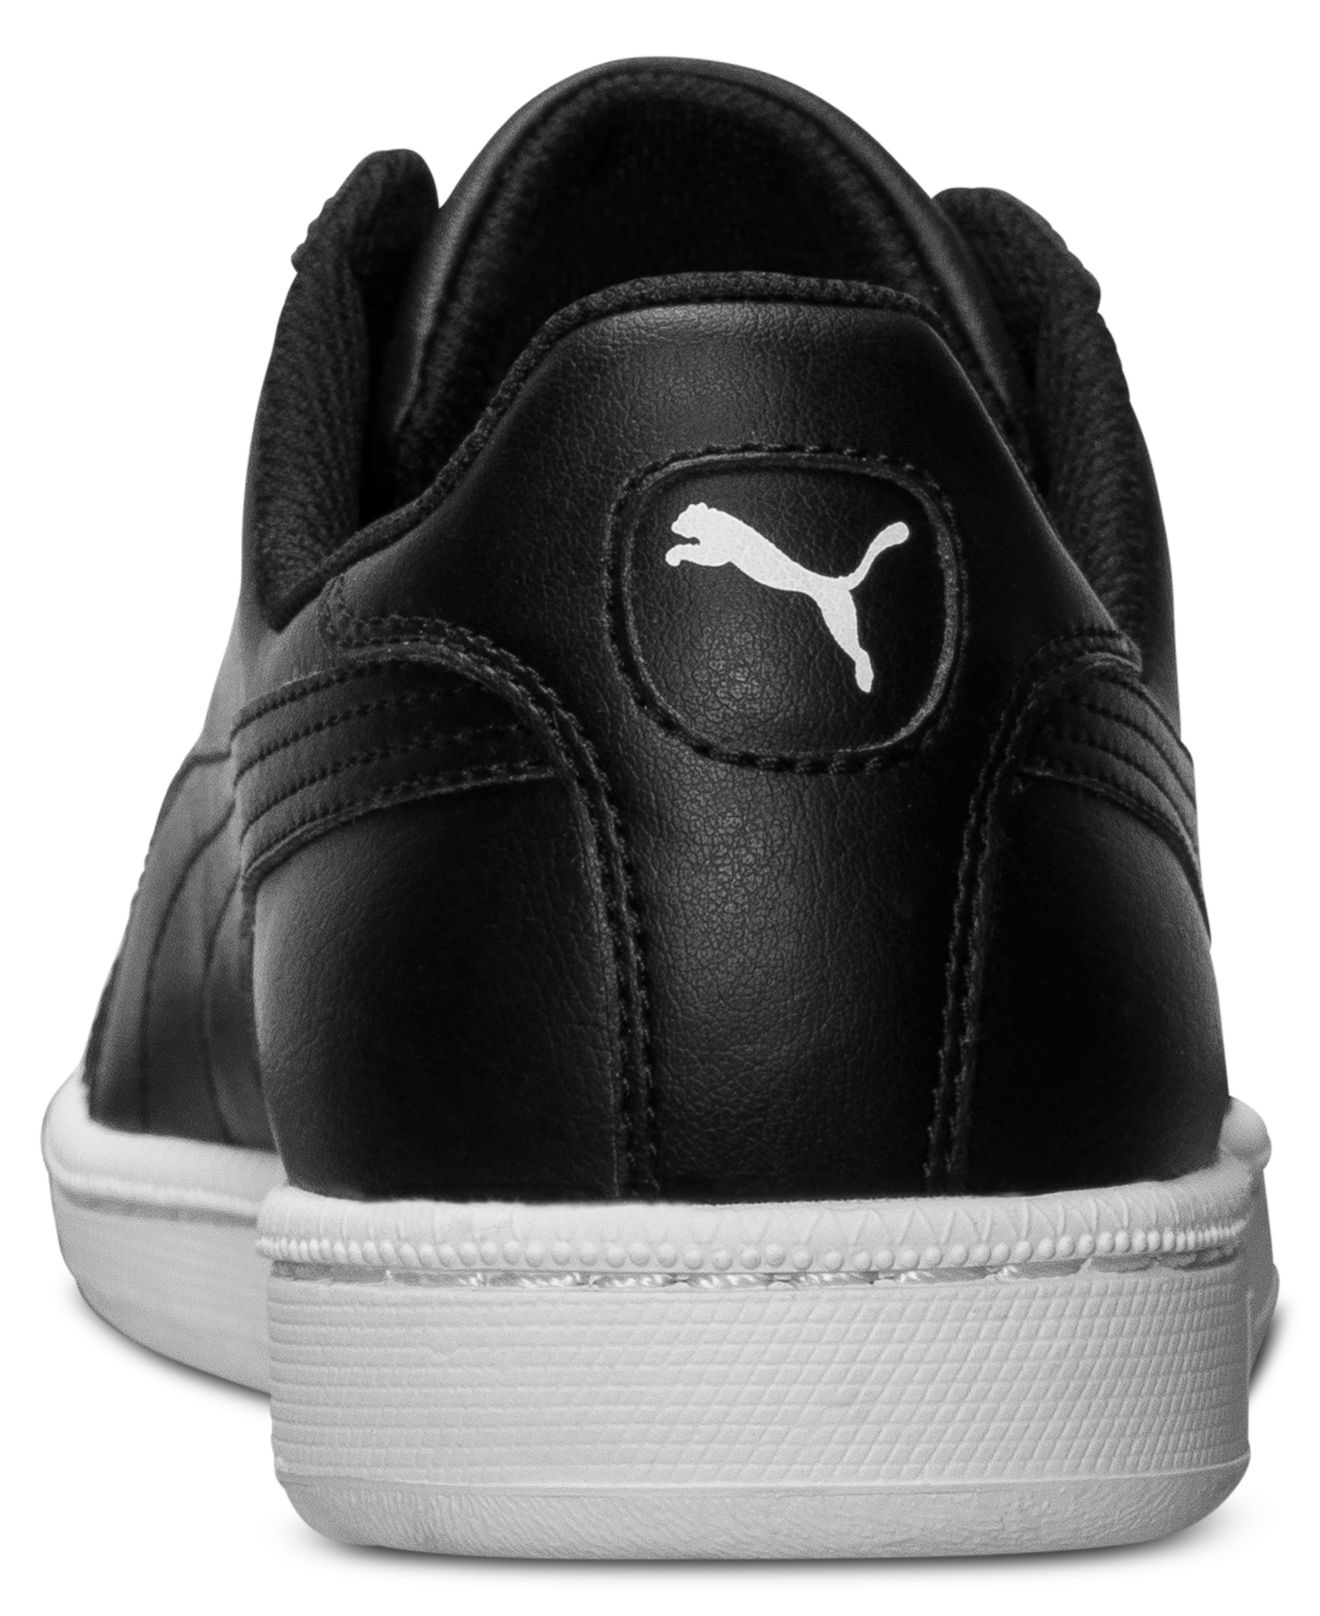 puma leather sneakers mens order 688f5 